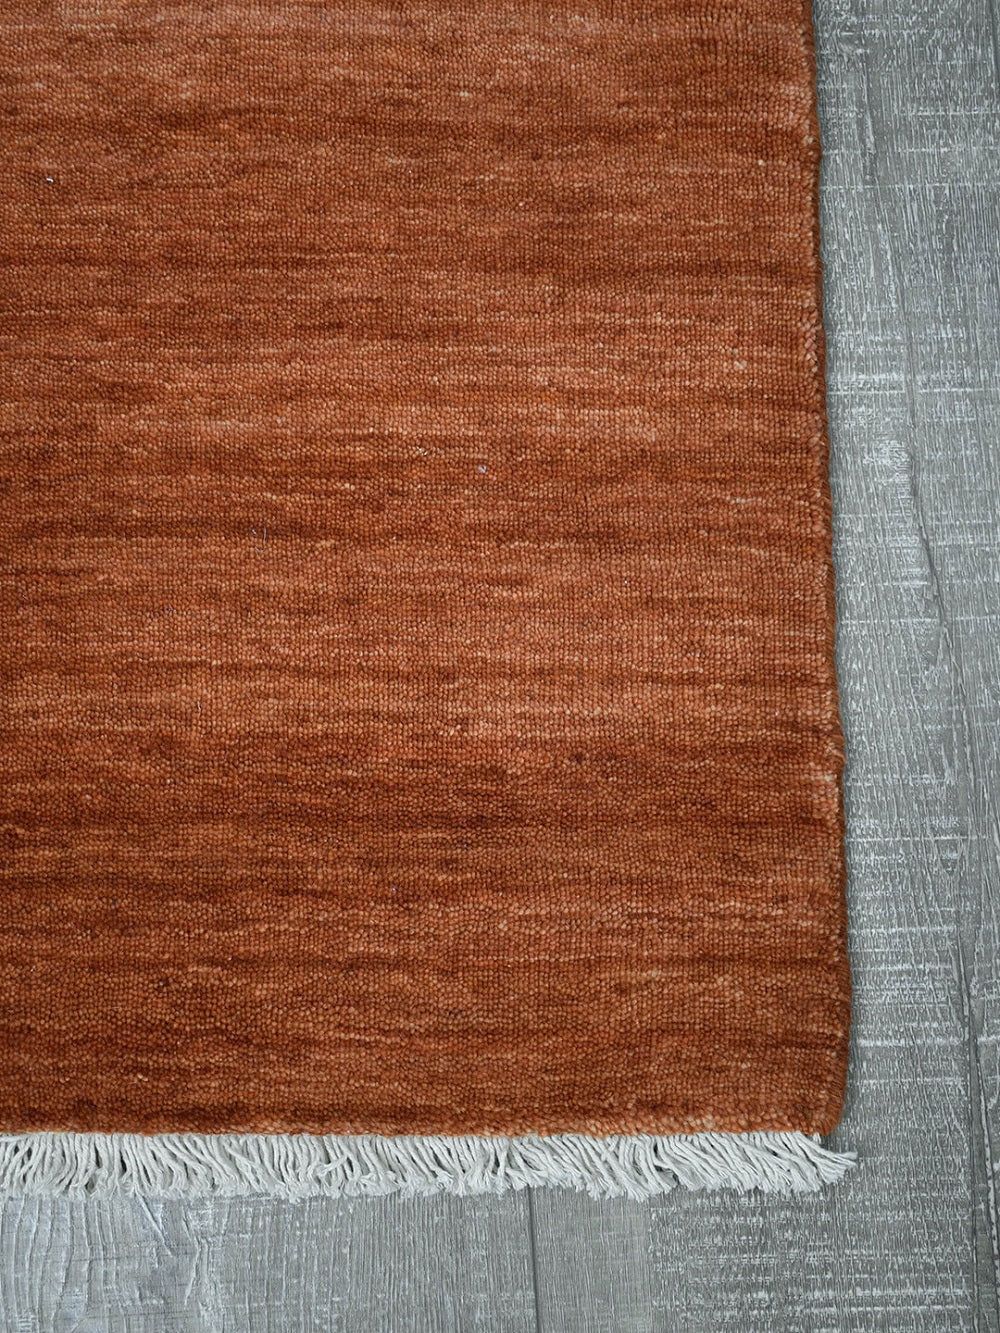 Diva Ochre Rug 20% off from the Rug Collection Stockist Make Your House A Home, Furniture Store Bendigo. Free Australia Wide Delivery